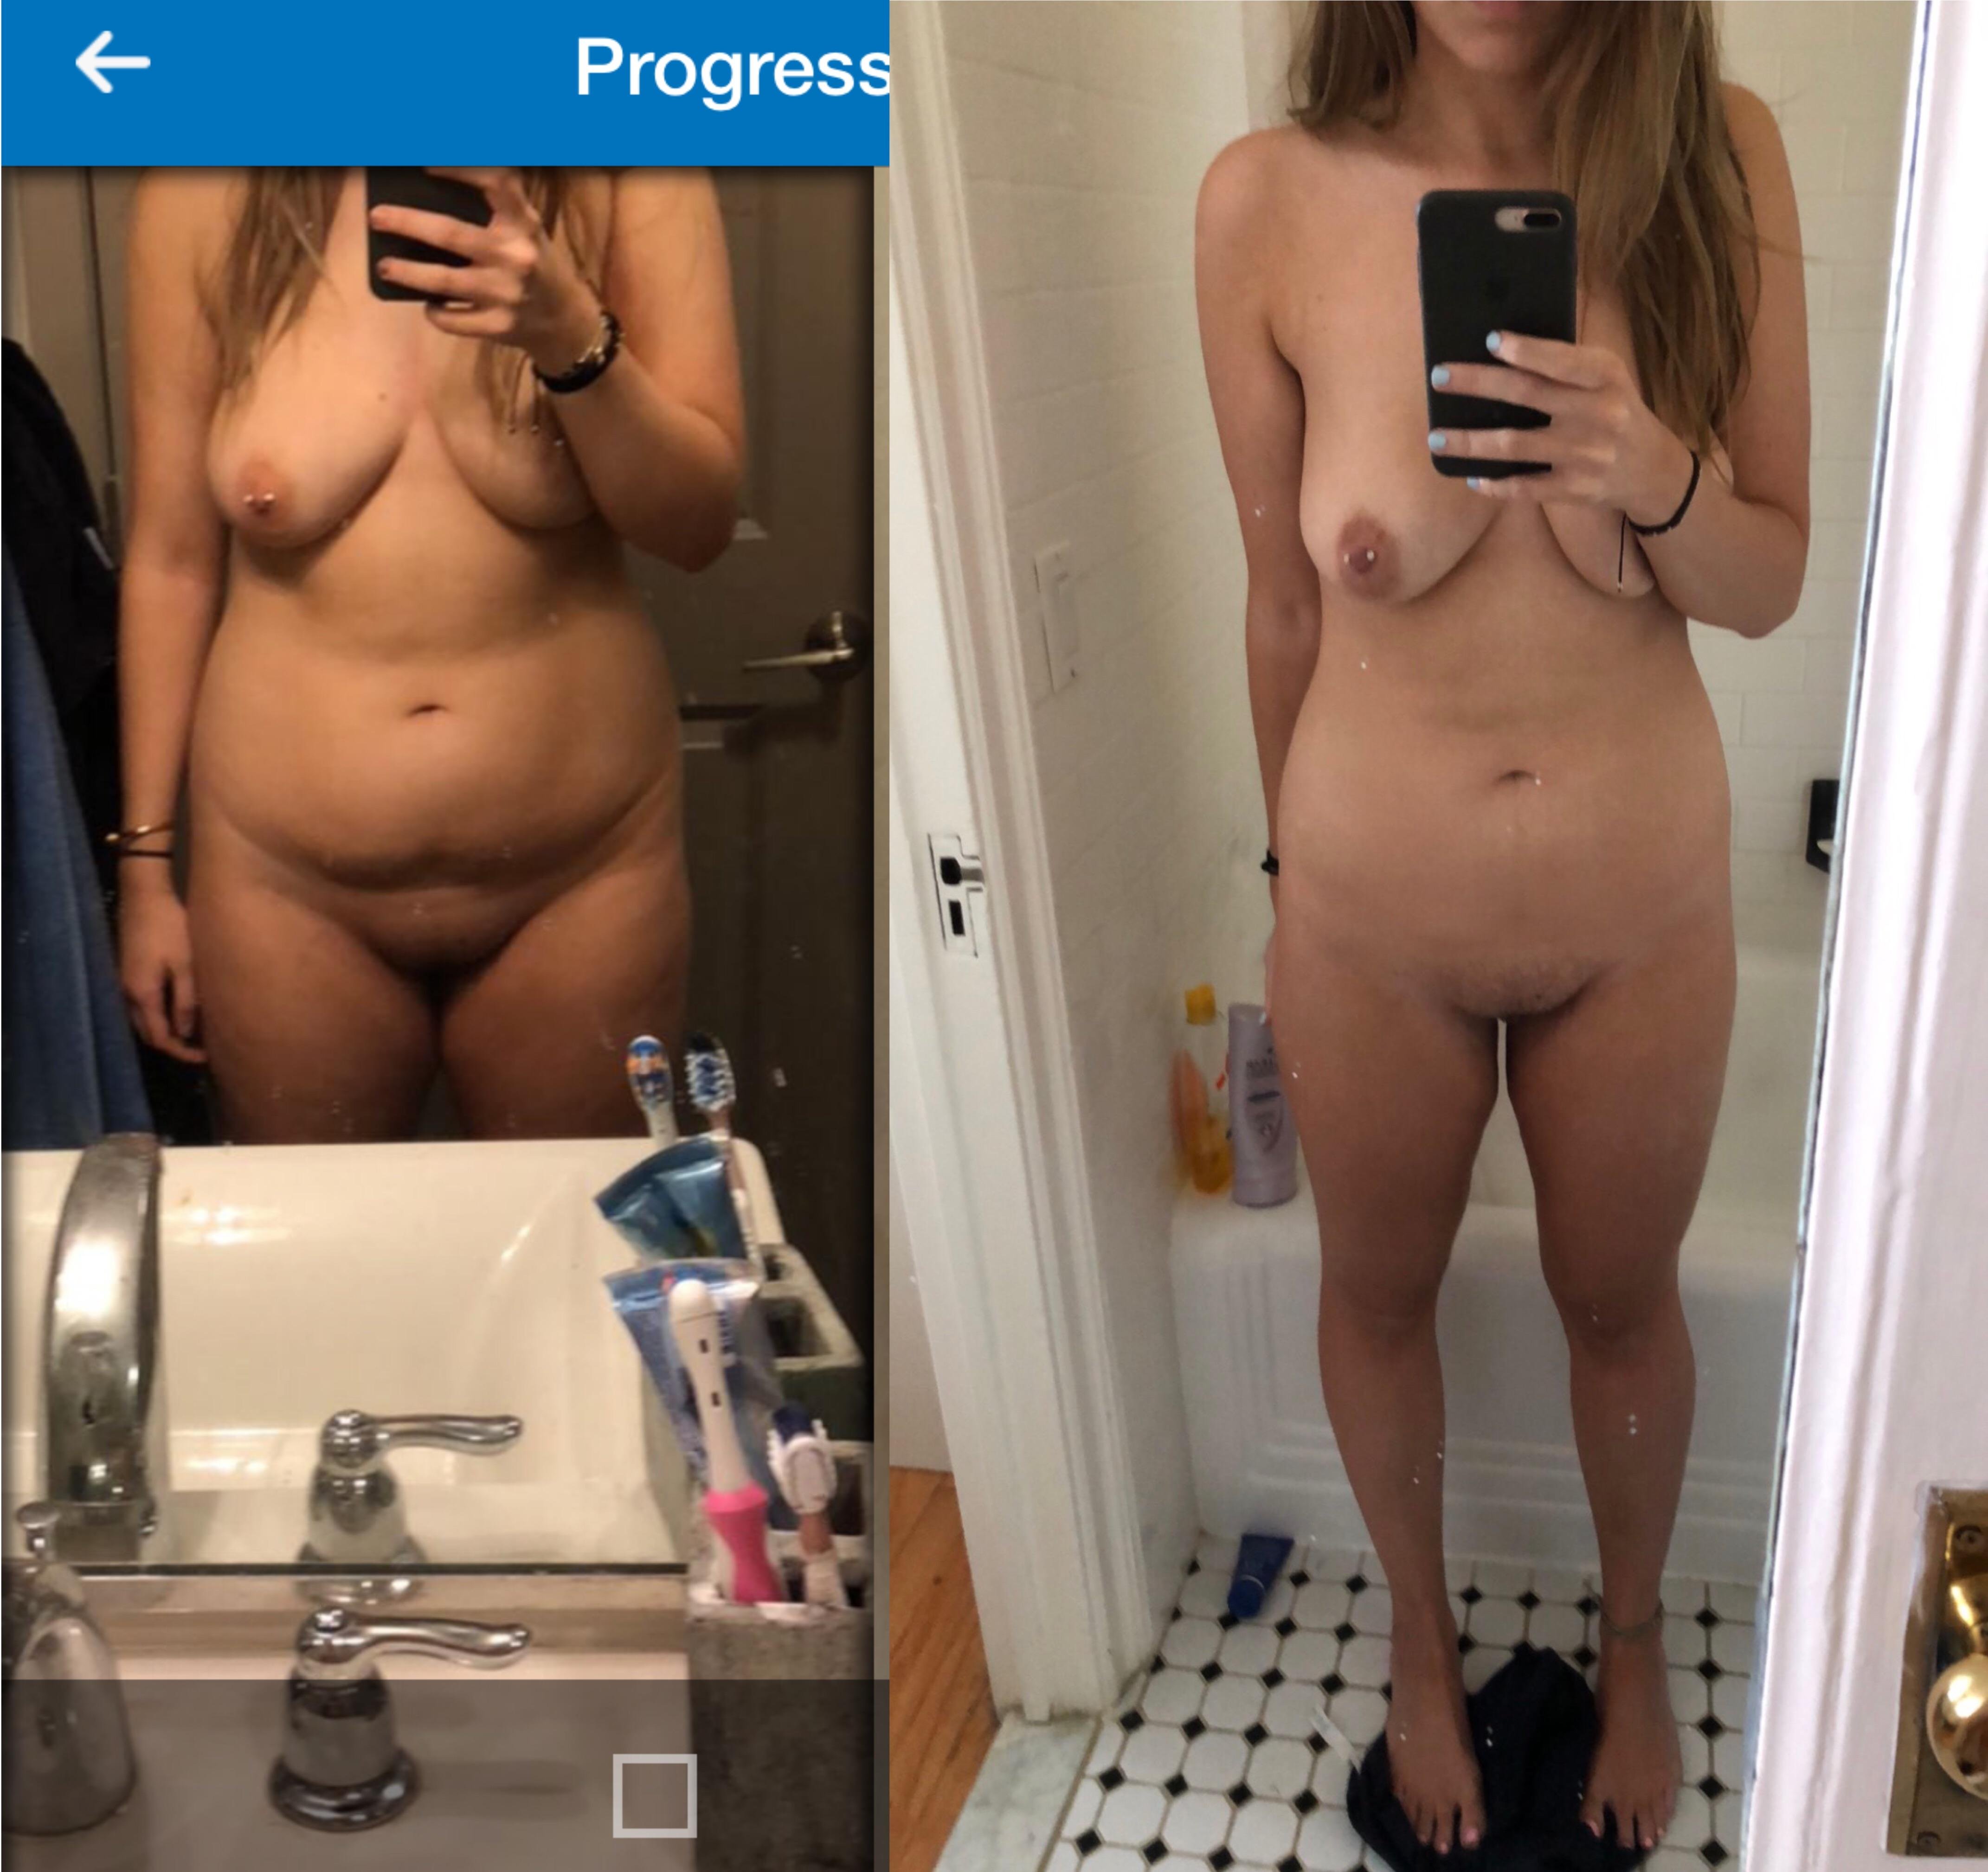 F/22/5’9 UPDATE! 6 months (200&gt;150, first photo was taken at 180) finally broke through my 1 month plateau into the 140s (before I ate breakfast lol)